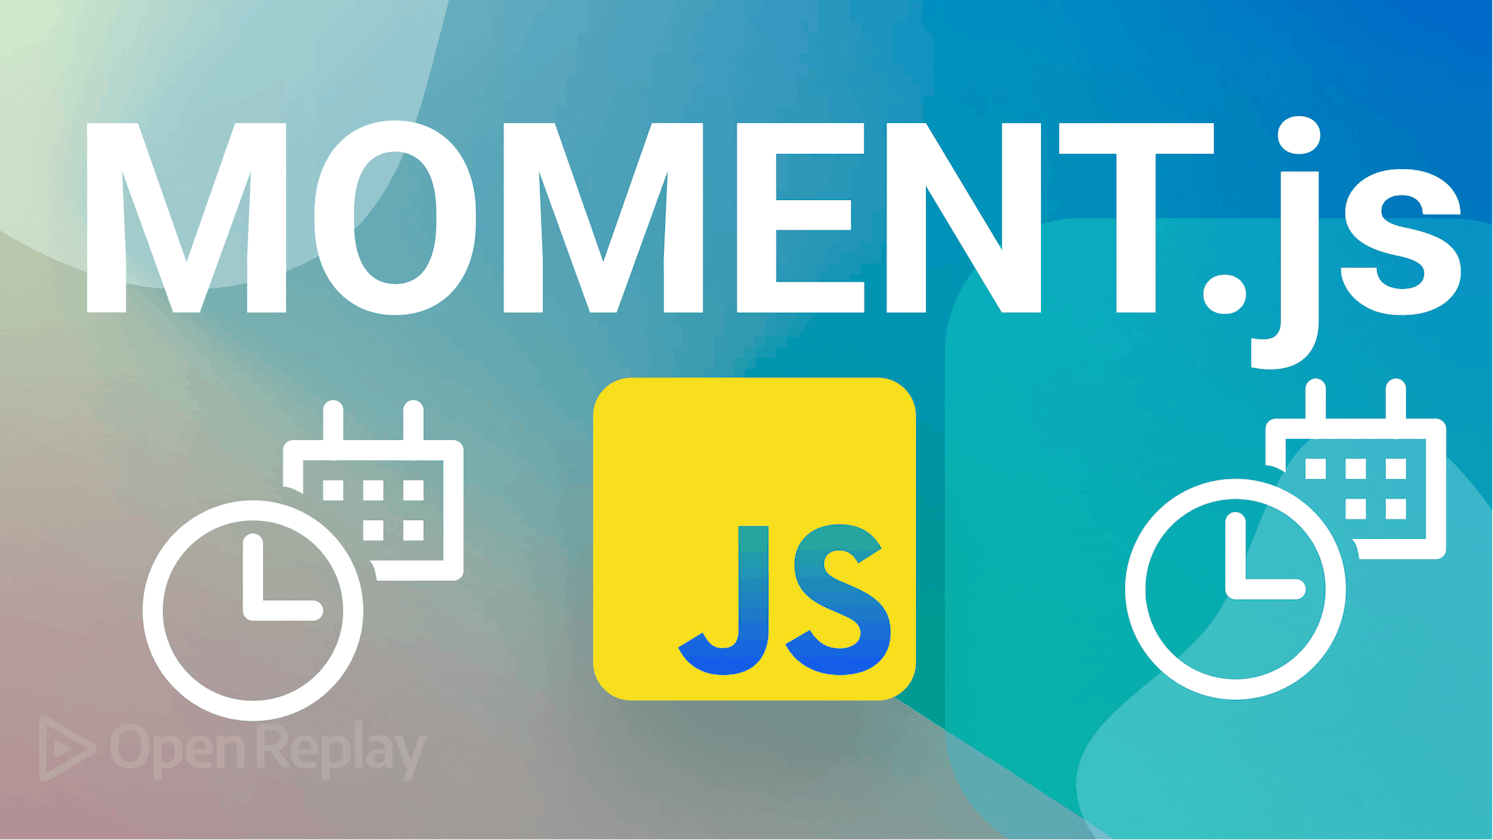 Common date/time operations without Moment.js